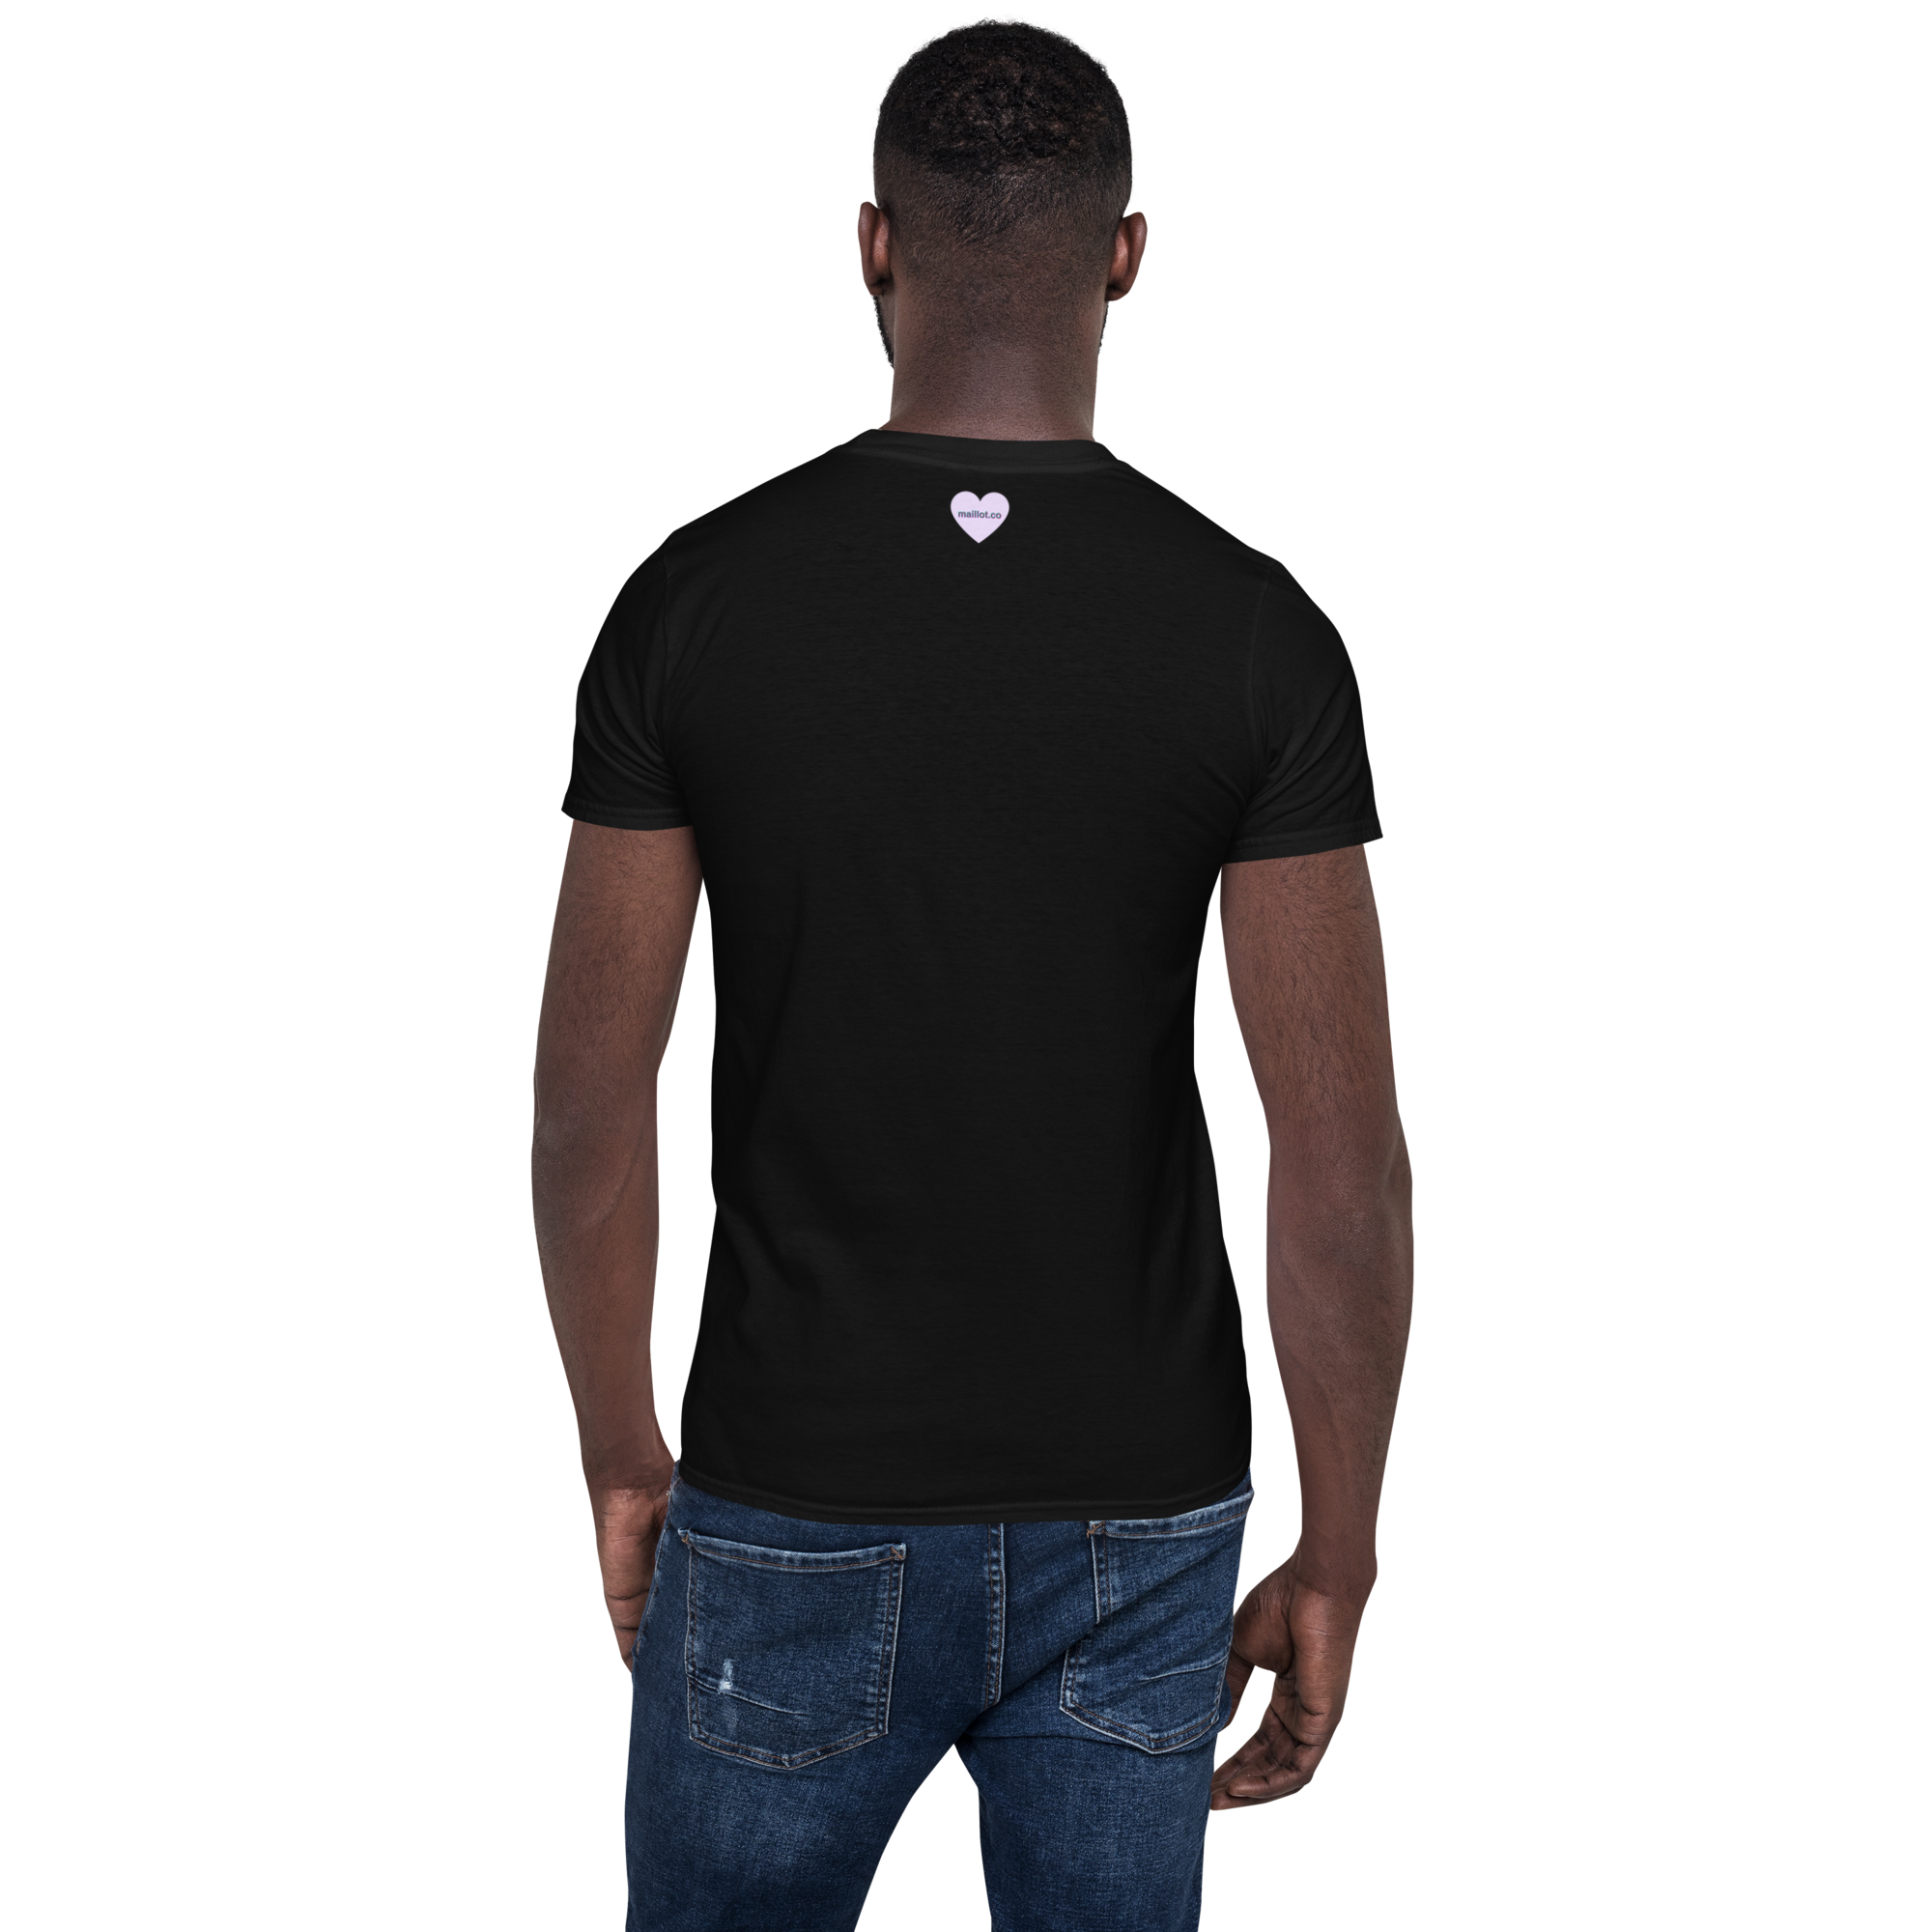 maillot.co | Believe Women Crew Neck Tee - Black | short-sleeve black t-shirt | back view on male model with maillot.co logo at top center